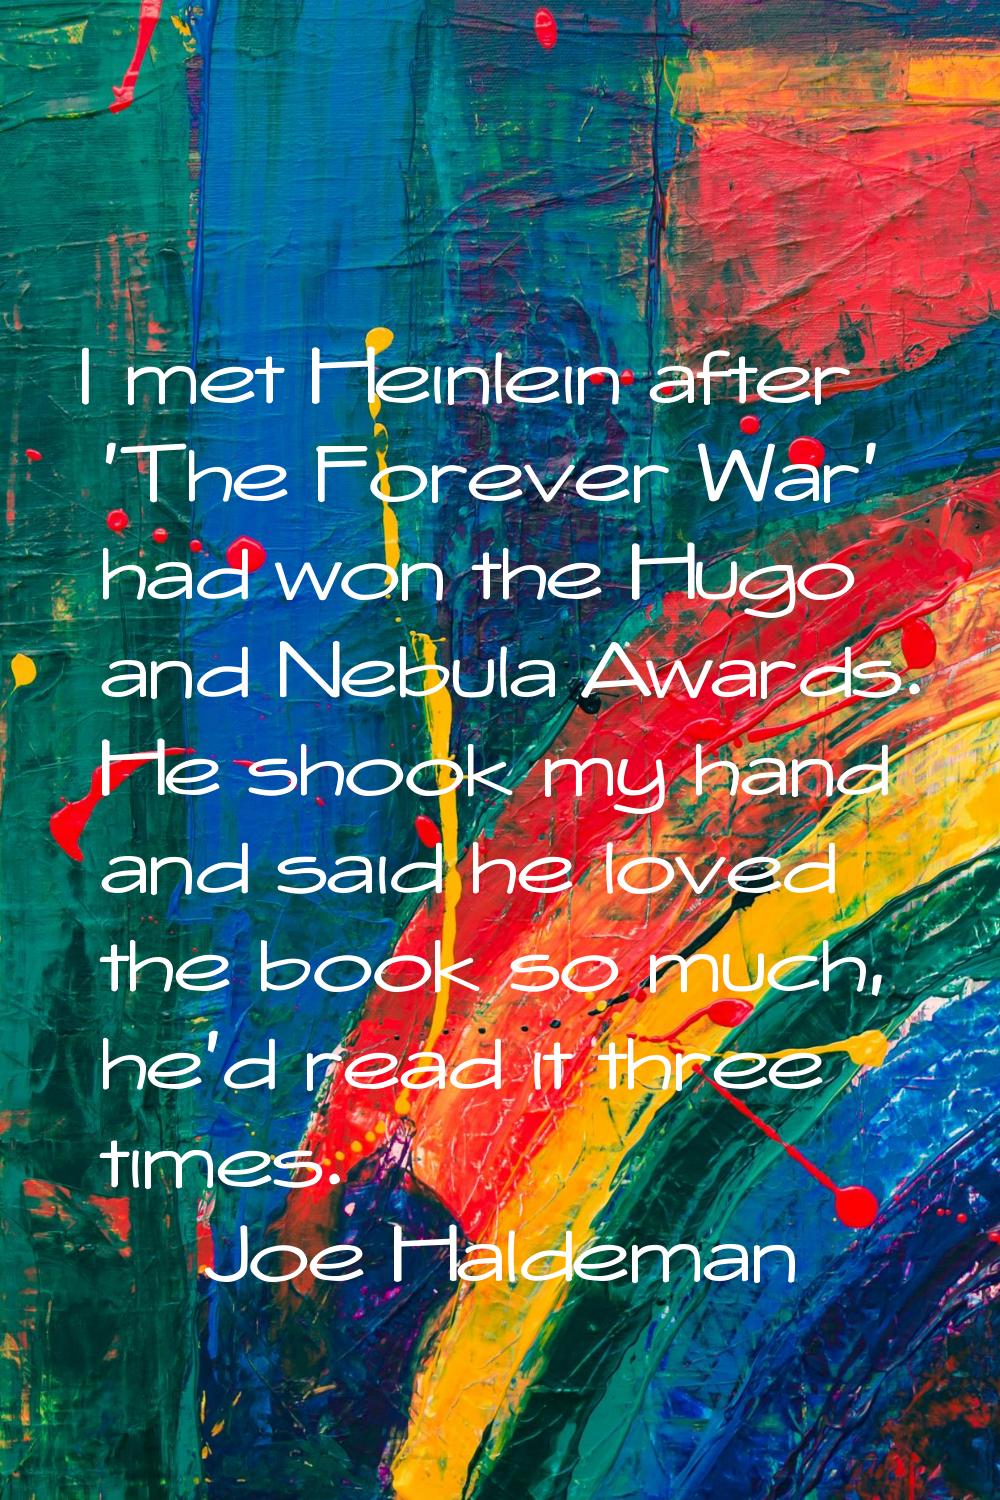 I met Heinlein after 'The Forever War' had won the Hugo and Nebula Awards. He shook my hand and sai